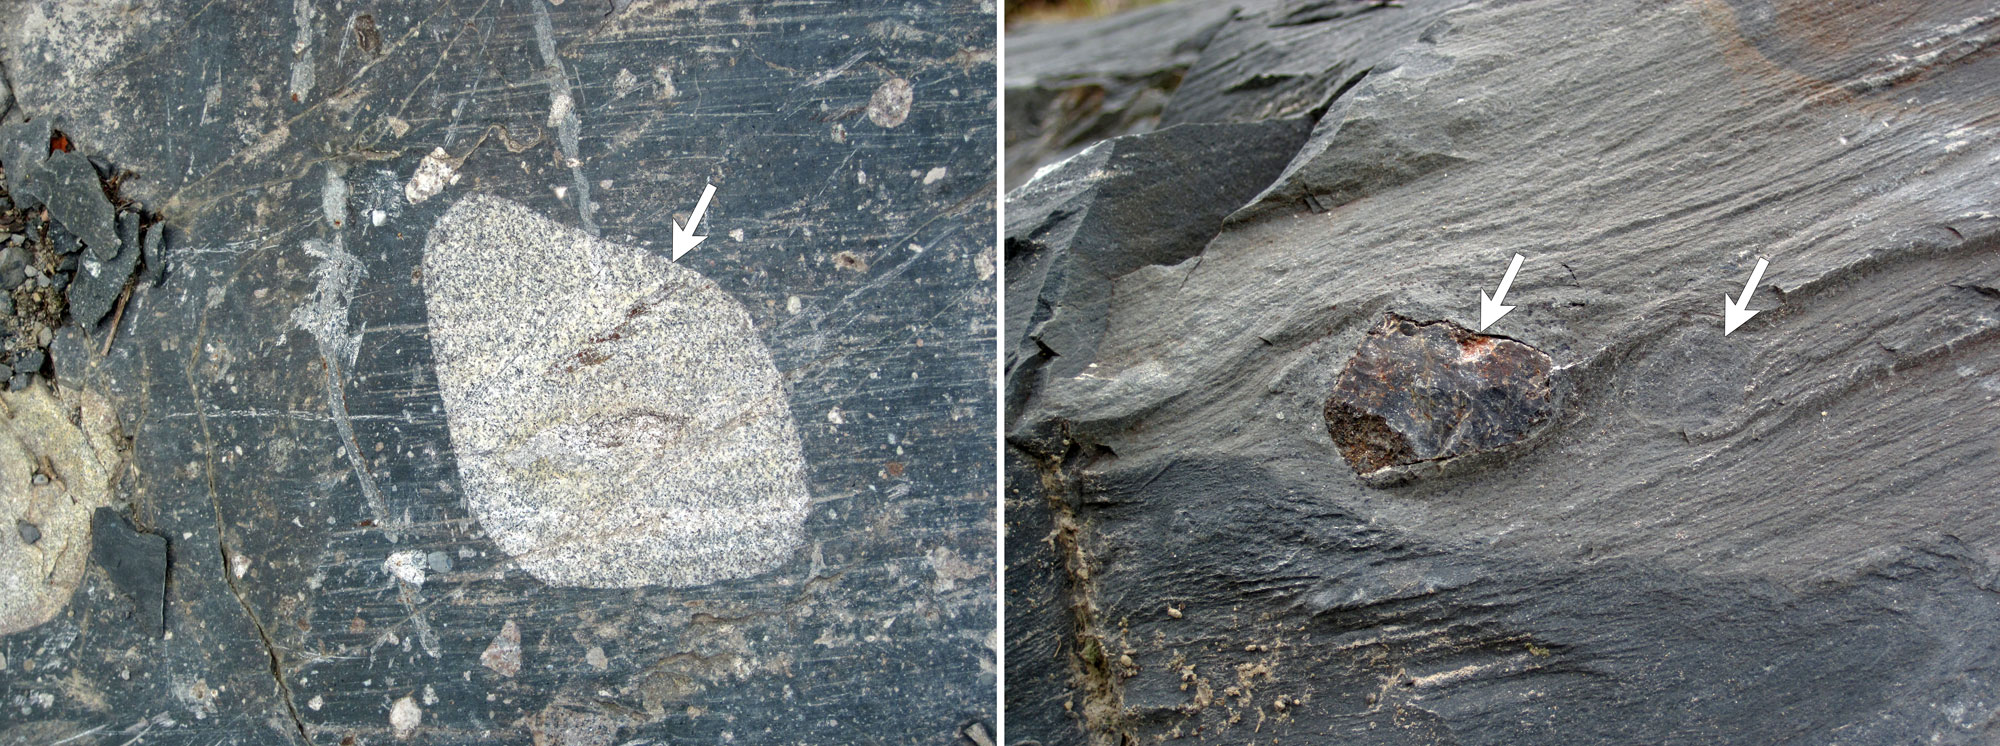 2-Panel figure showing 2.3 billion-year-old glacial deposits from Canada. Panel 1: A tillite with a large cobble. Panel 2: Argillite with dropstones.